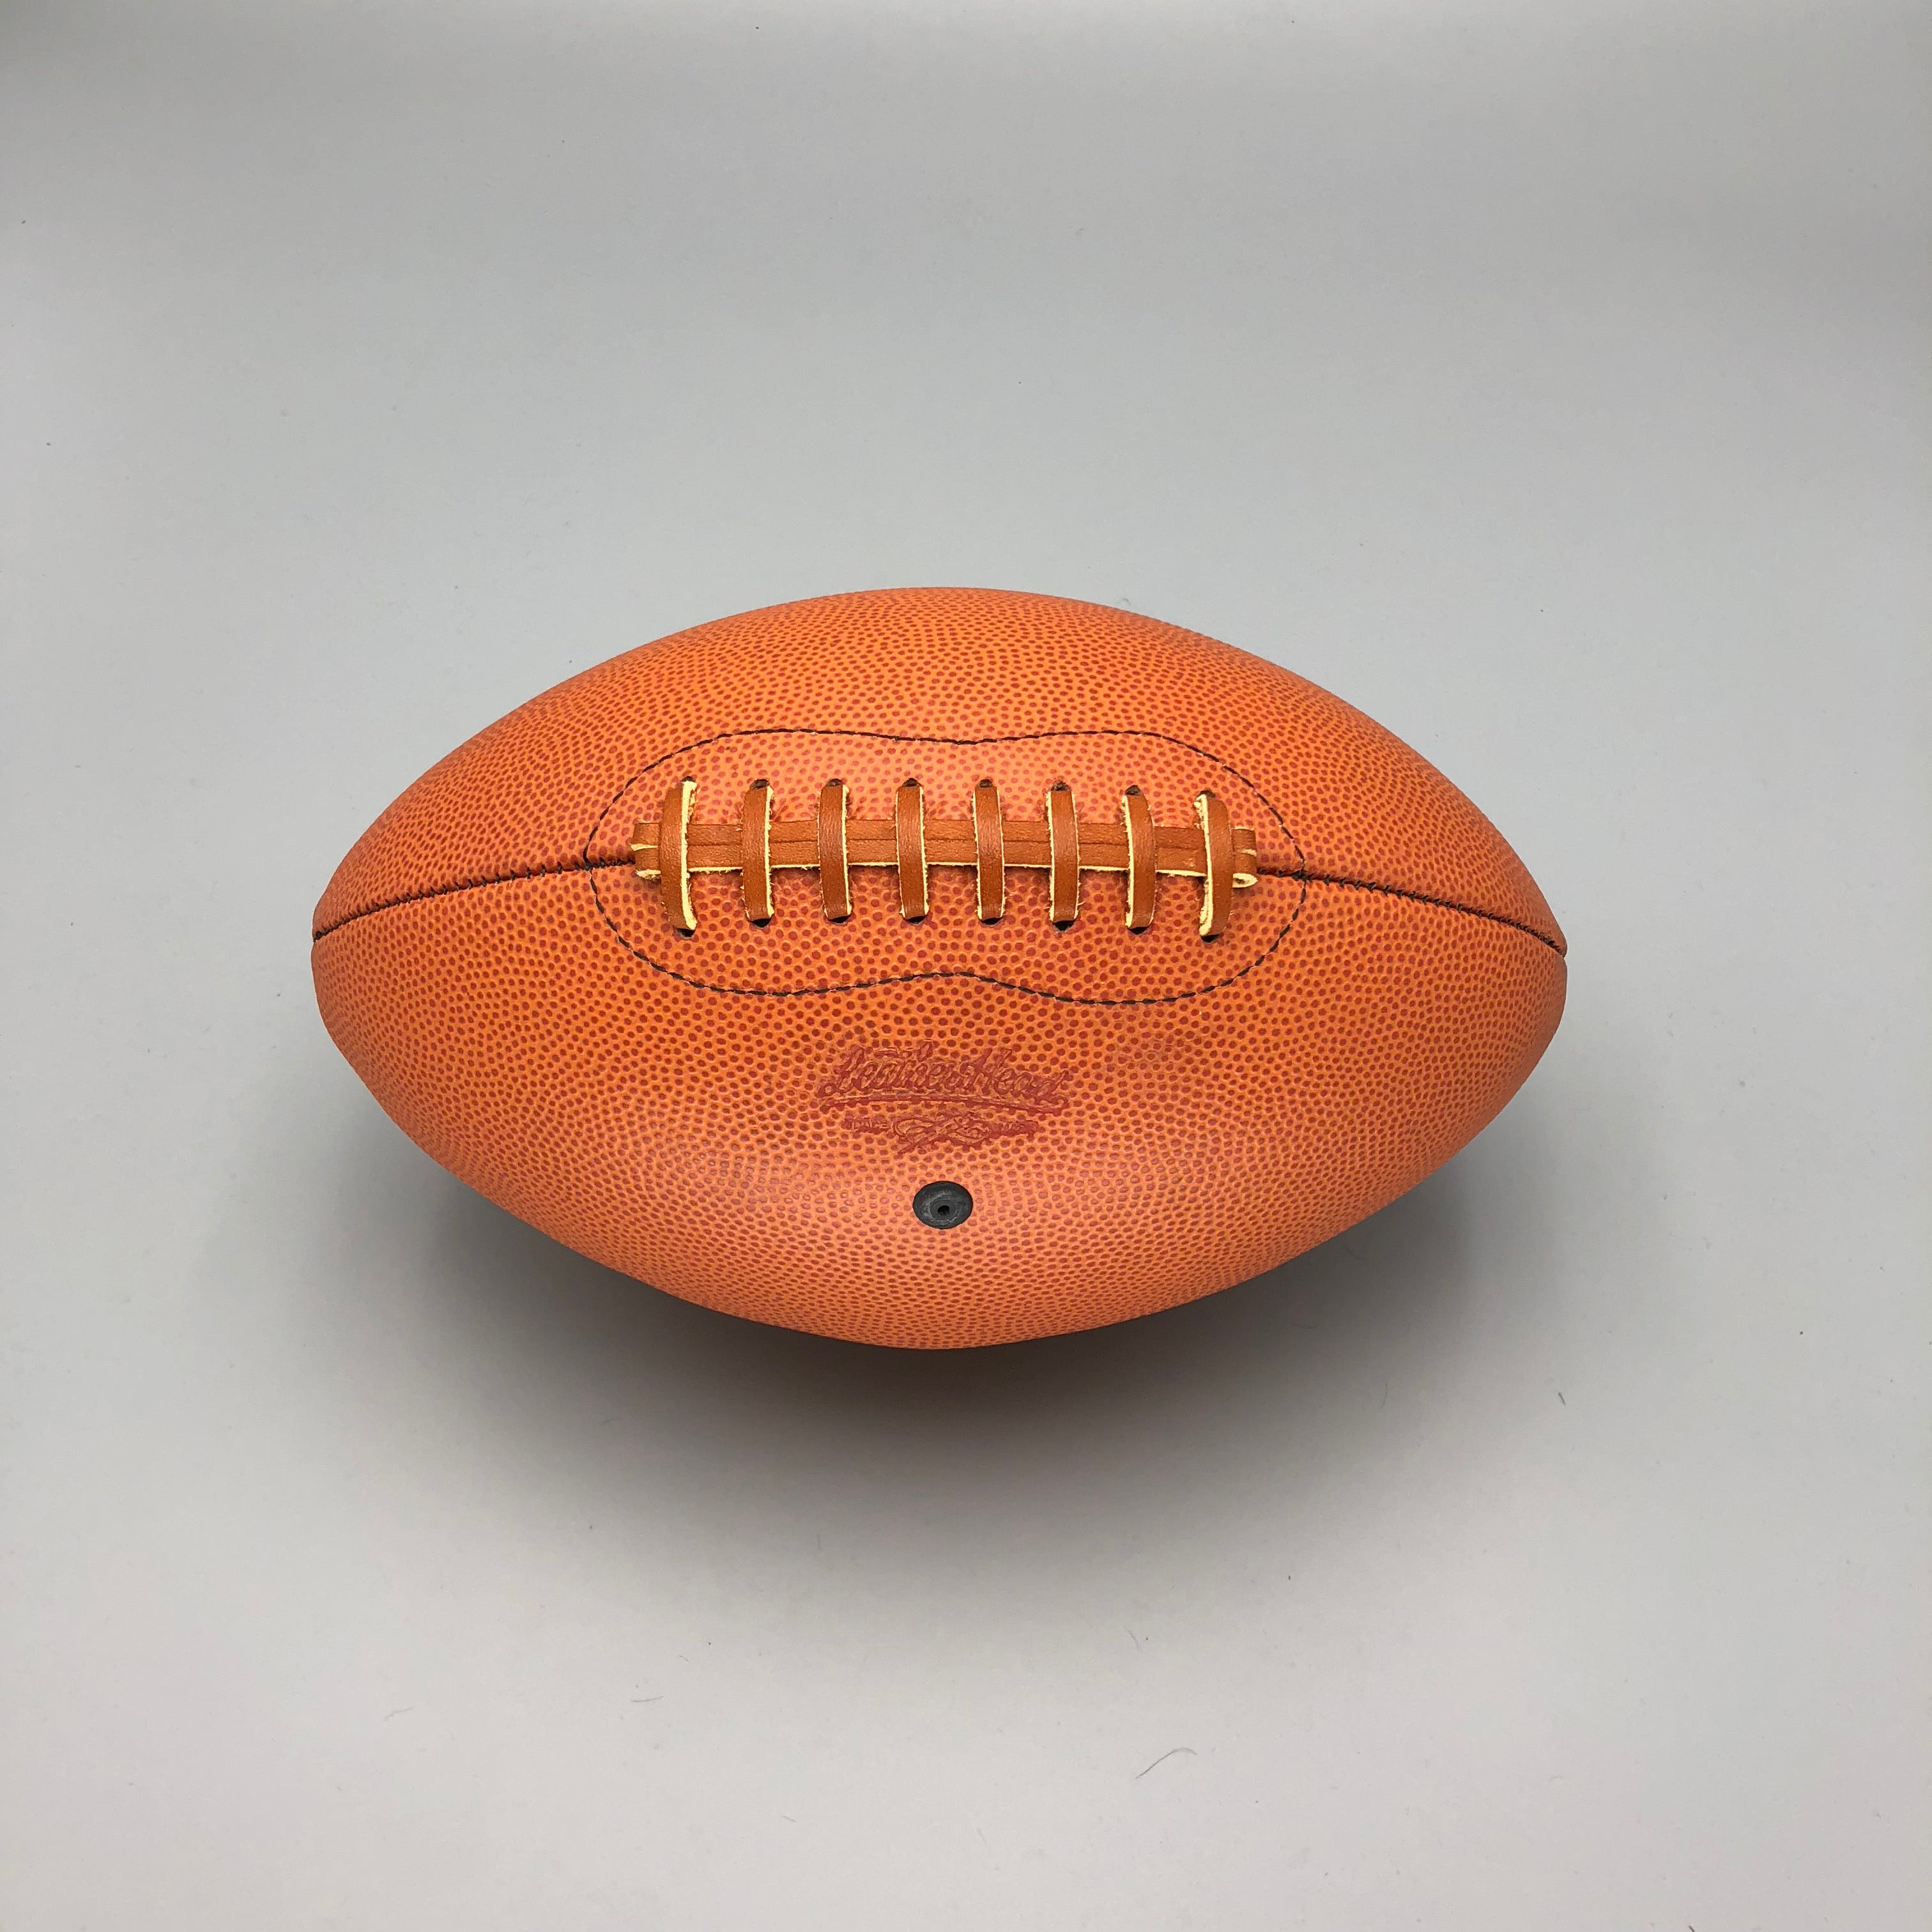 Pro-Series football in Horween basketball Leather